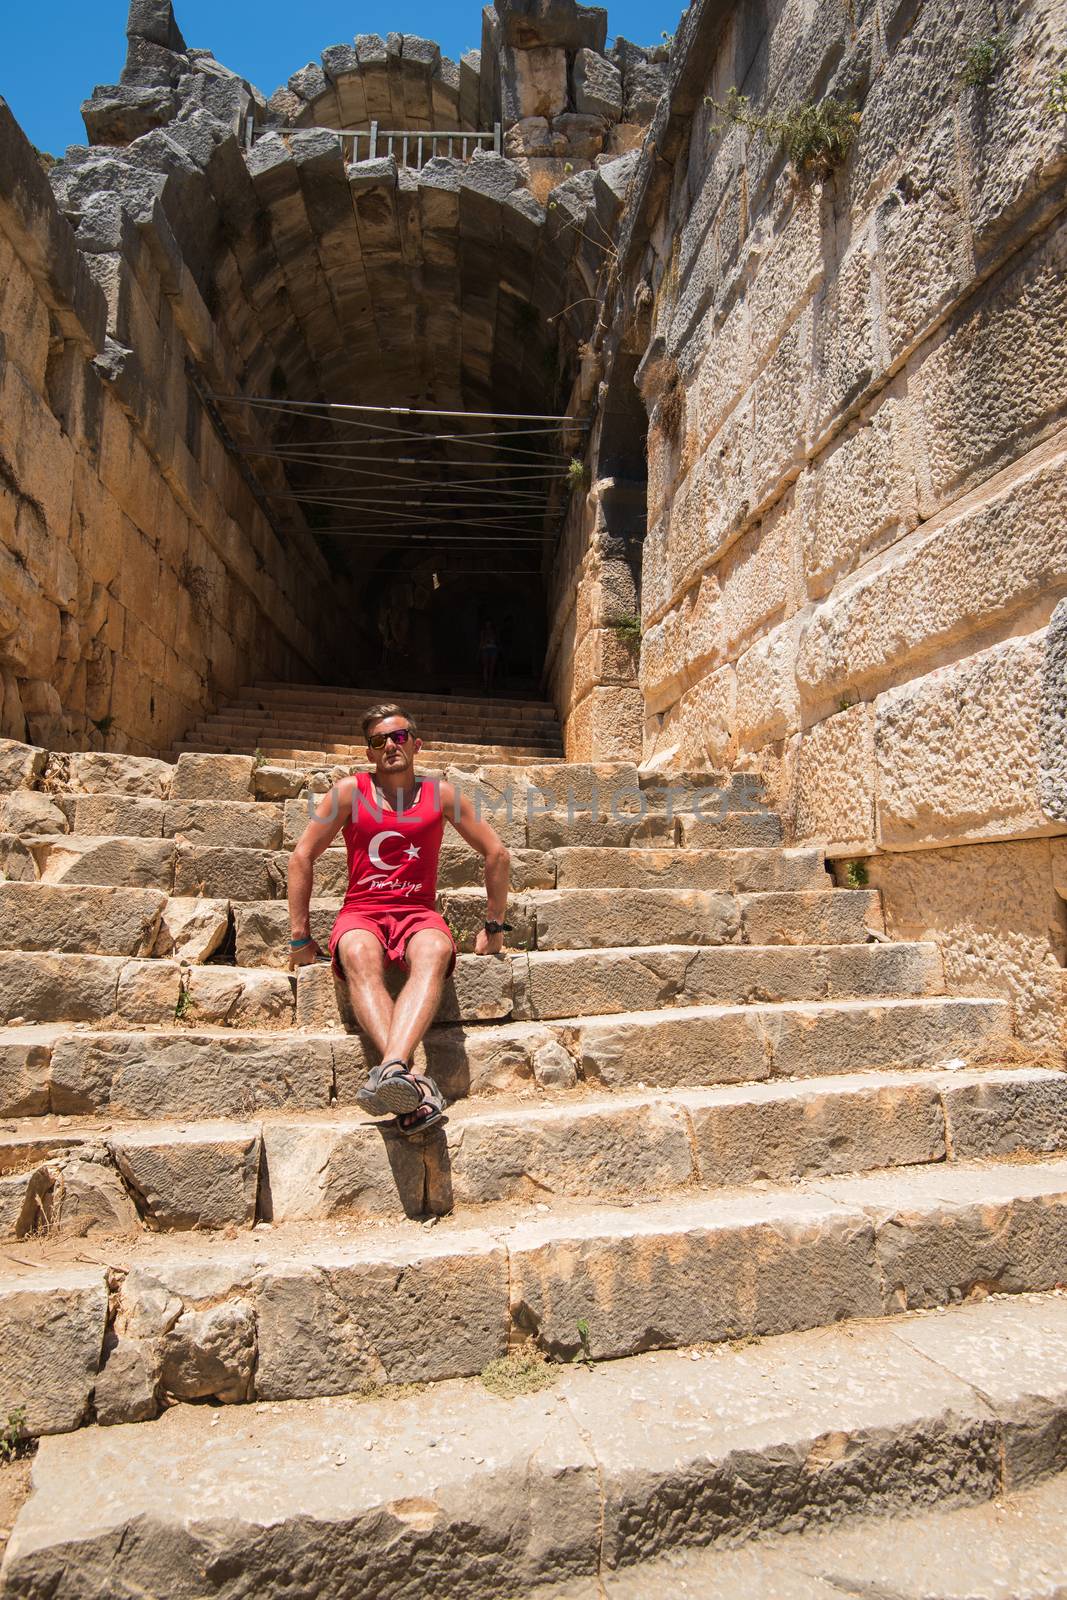 Young man at theatre in Myra ancient city of Antalya in Turkey.